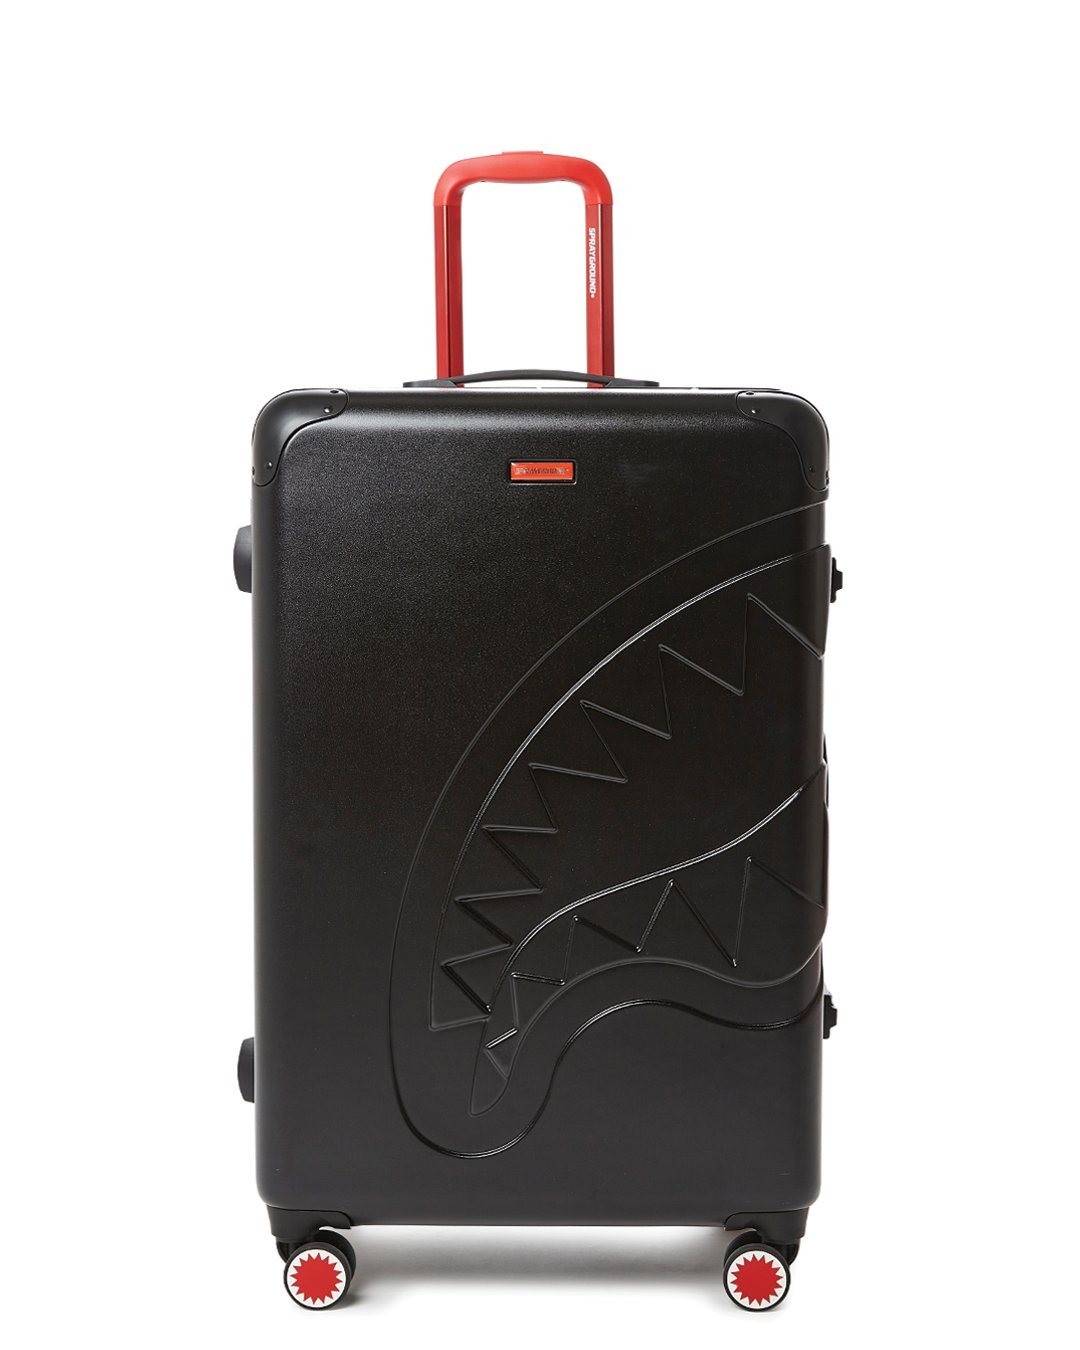 Discount | Sharkitecture (Black) 29.5” Full-Size Luggage Sprayground Sale - Discount | Sharkitecture (Black) 29.5” Full-Size Luggage Sprayground Sale-01-0